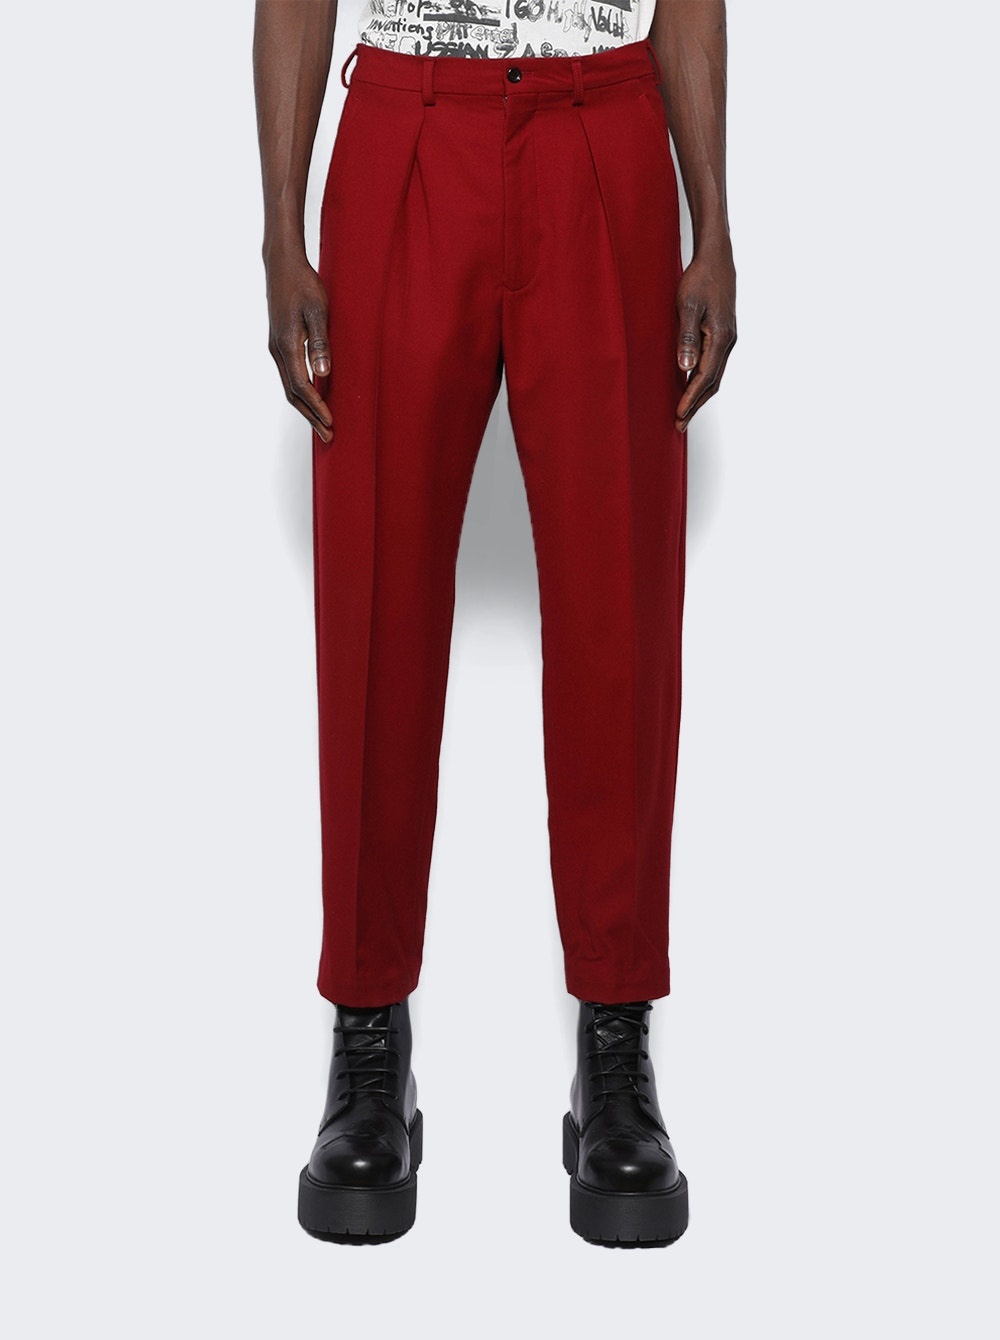 Solitaire Trouser Scarlet Red - 3